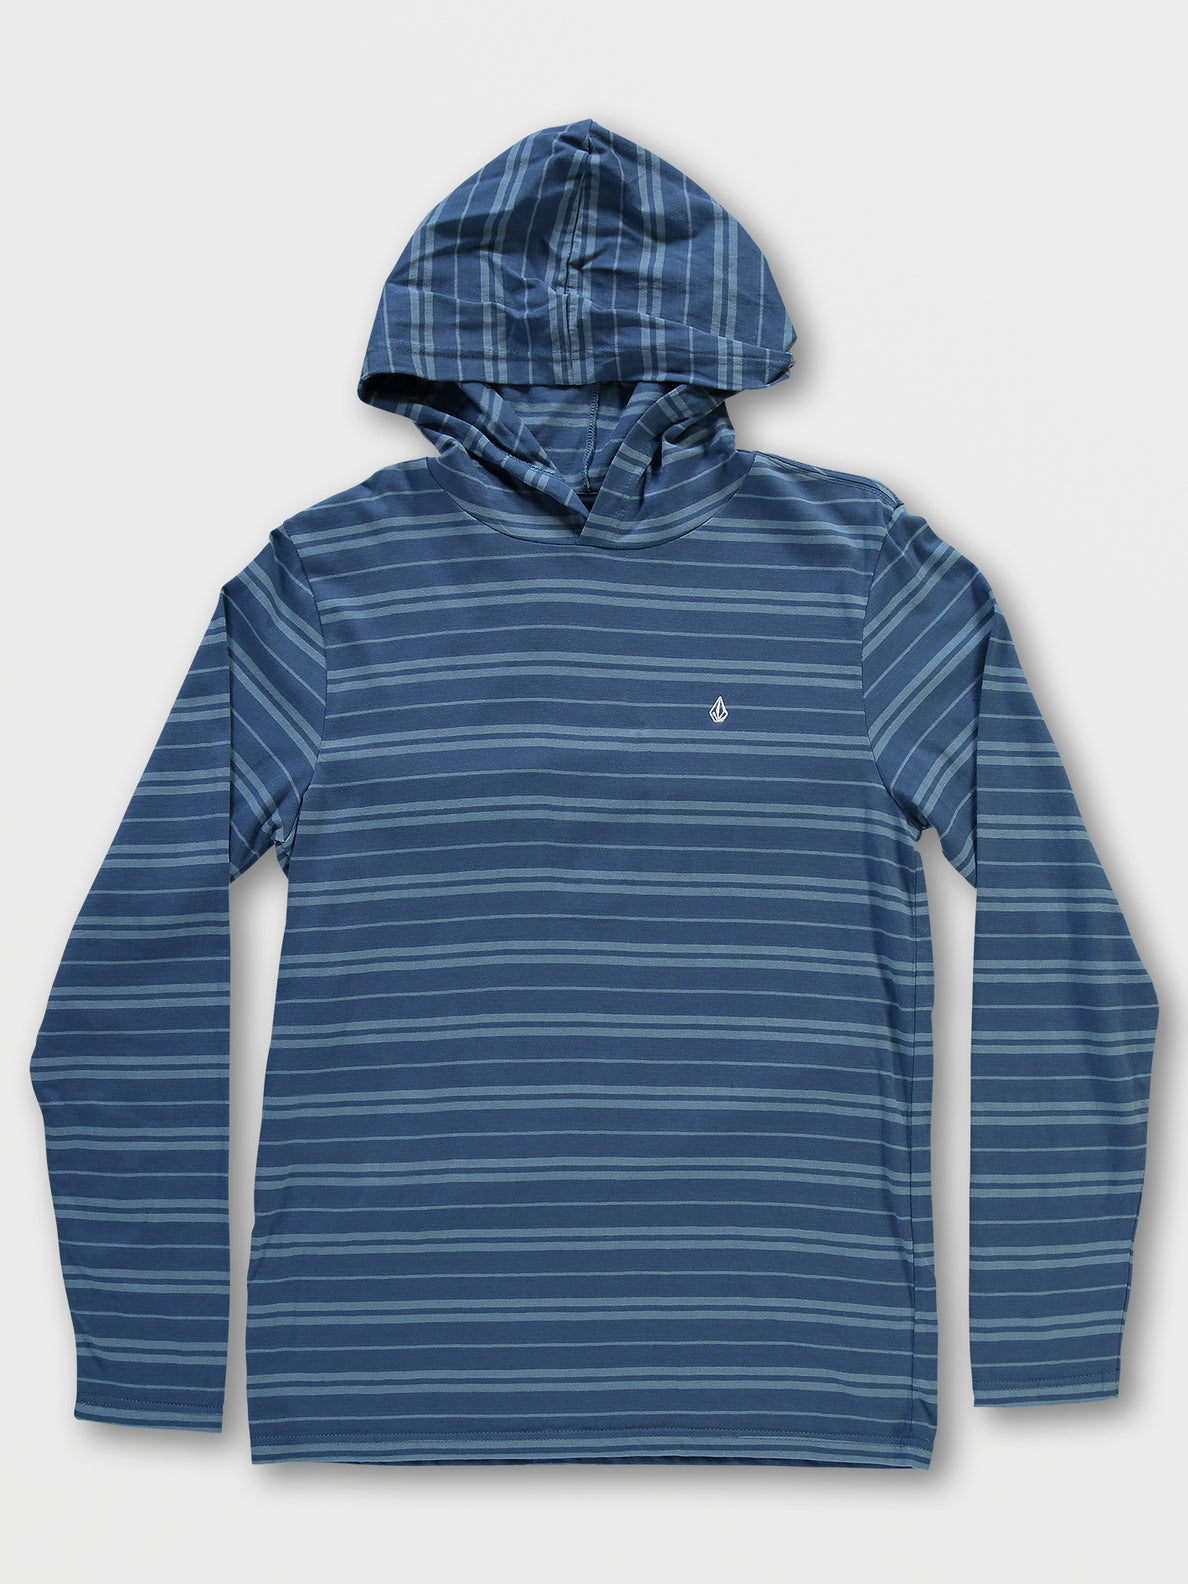 Parables Striped Hooded Shirt - Wrecked Indigo